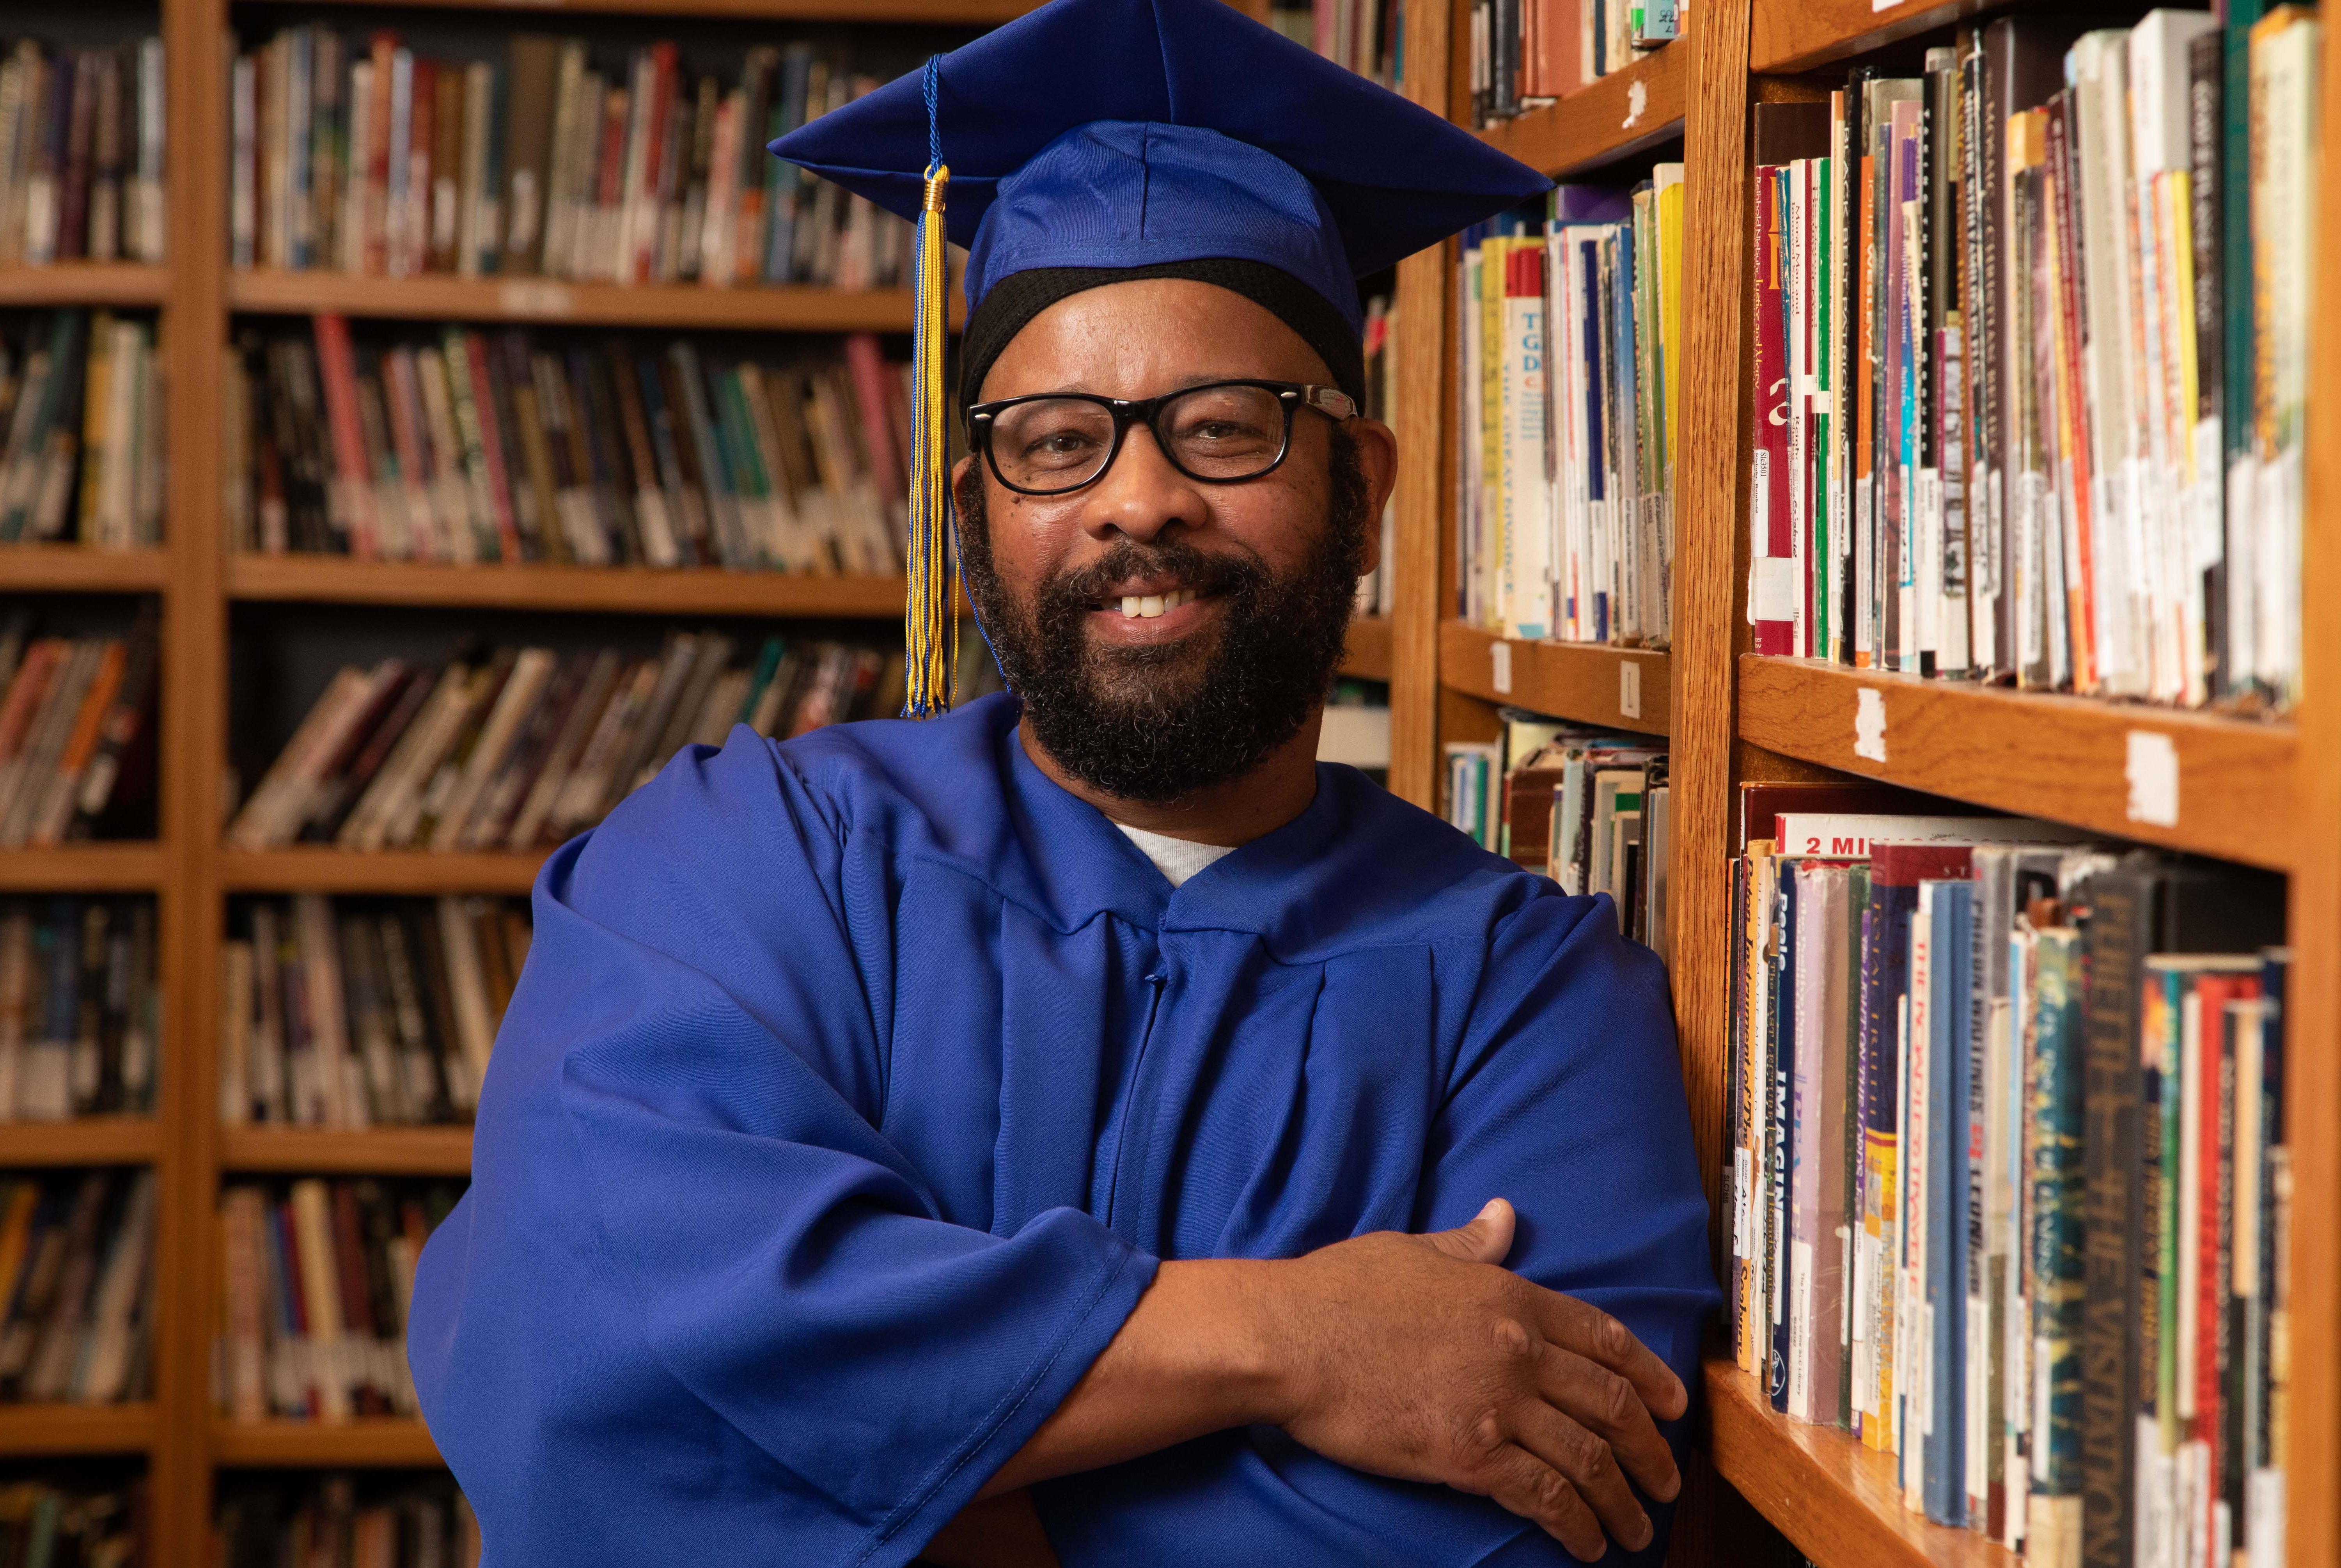 ECF resident Richard Johnson poses before the learning celebration Wednesday in the library at the ECF Spiritual Life Center. Johnson, who began his sentence in 1993 and will release in 2036, earned a high school diploma through a program offered by Barton Community College.